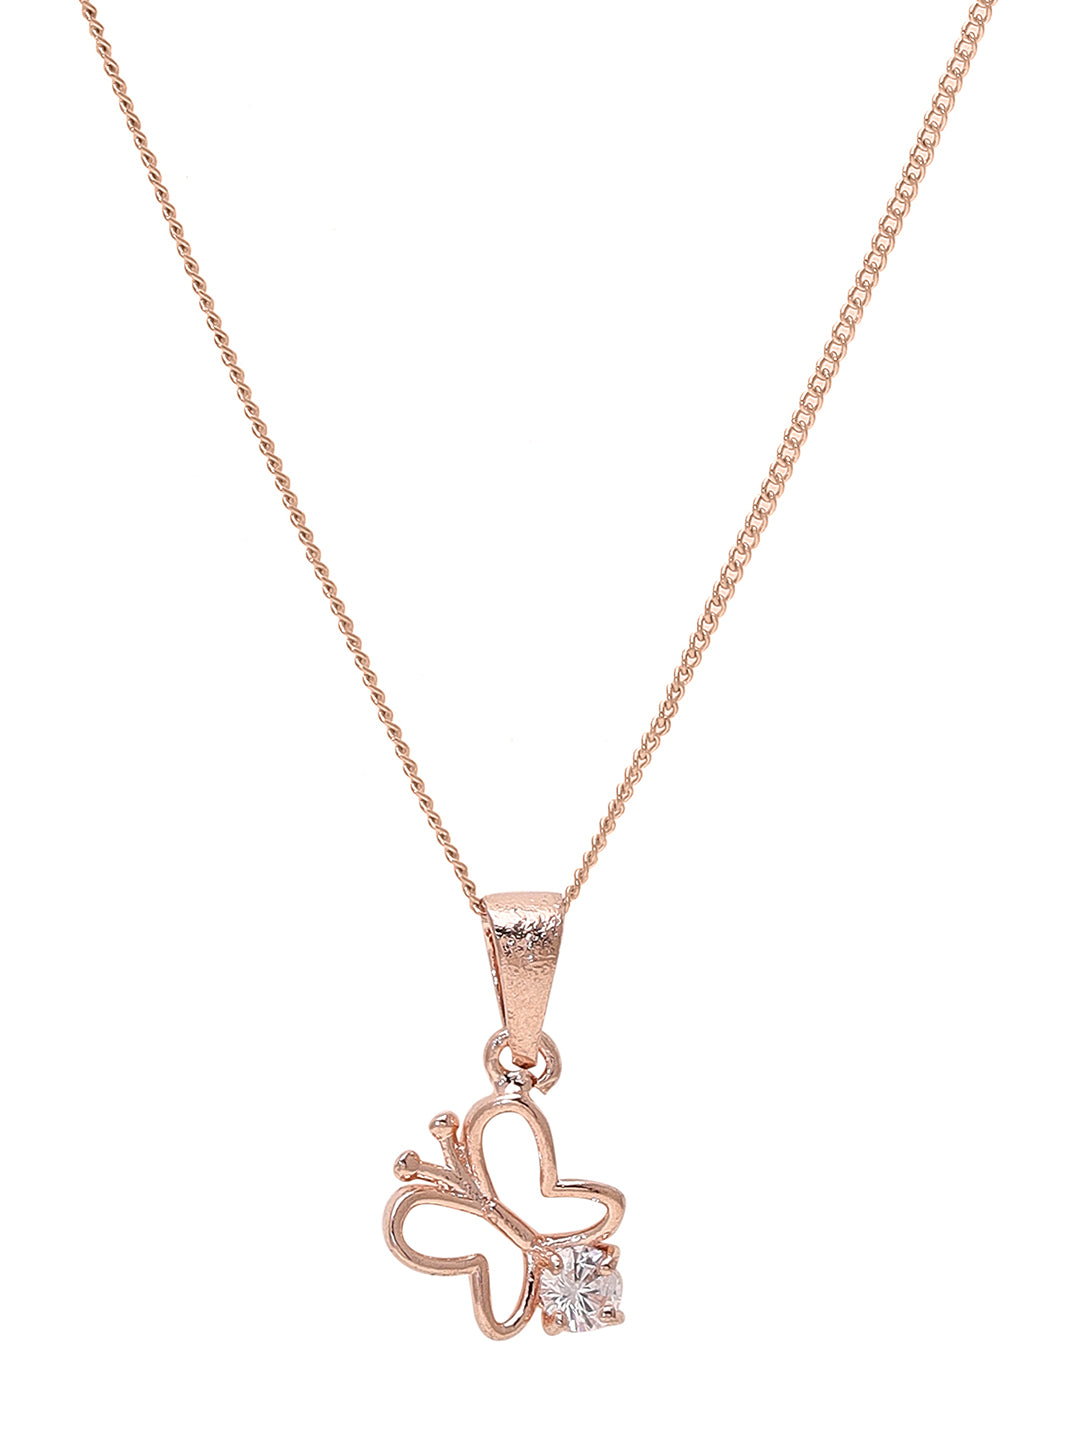 Priyaasi Whimsical Wings Rose Gold Plated Butterfly Pendant Necklace